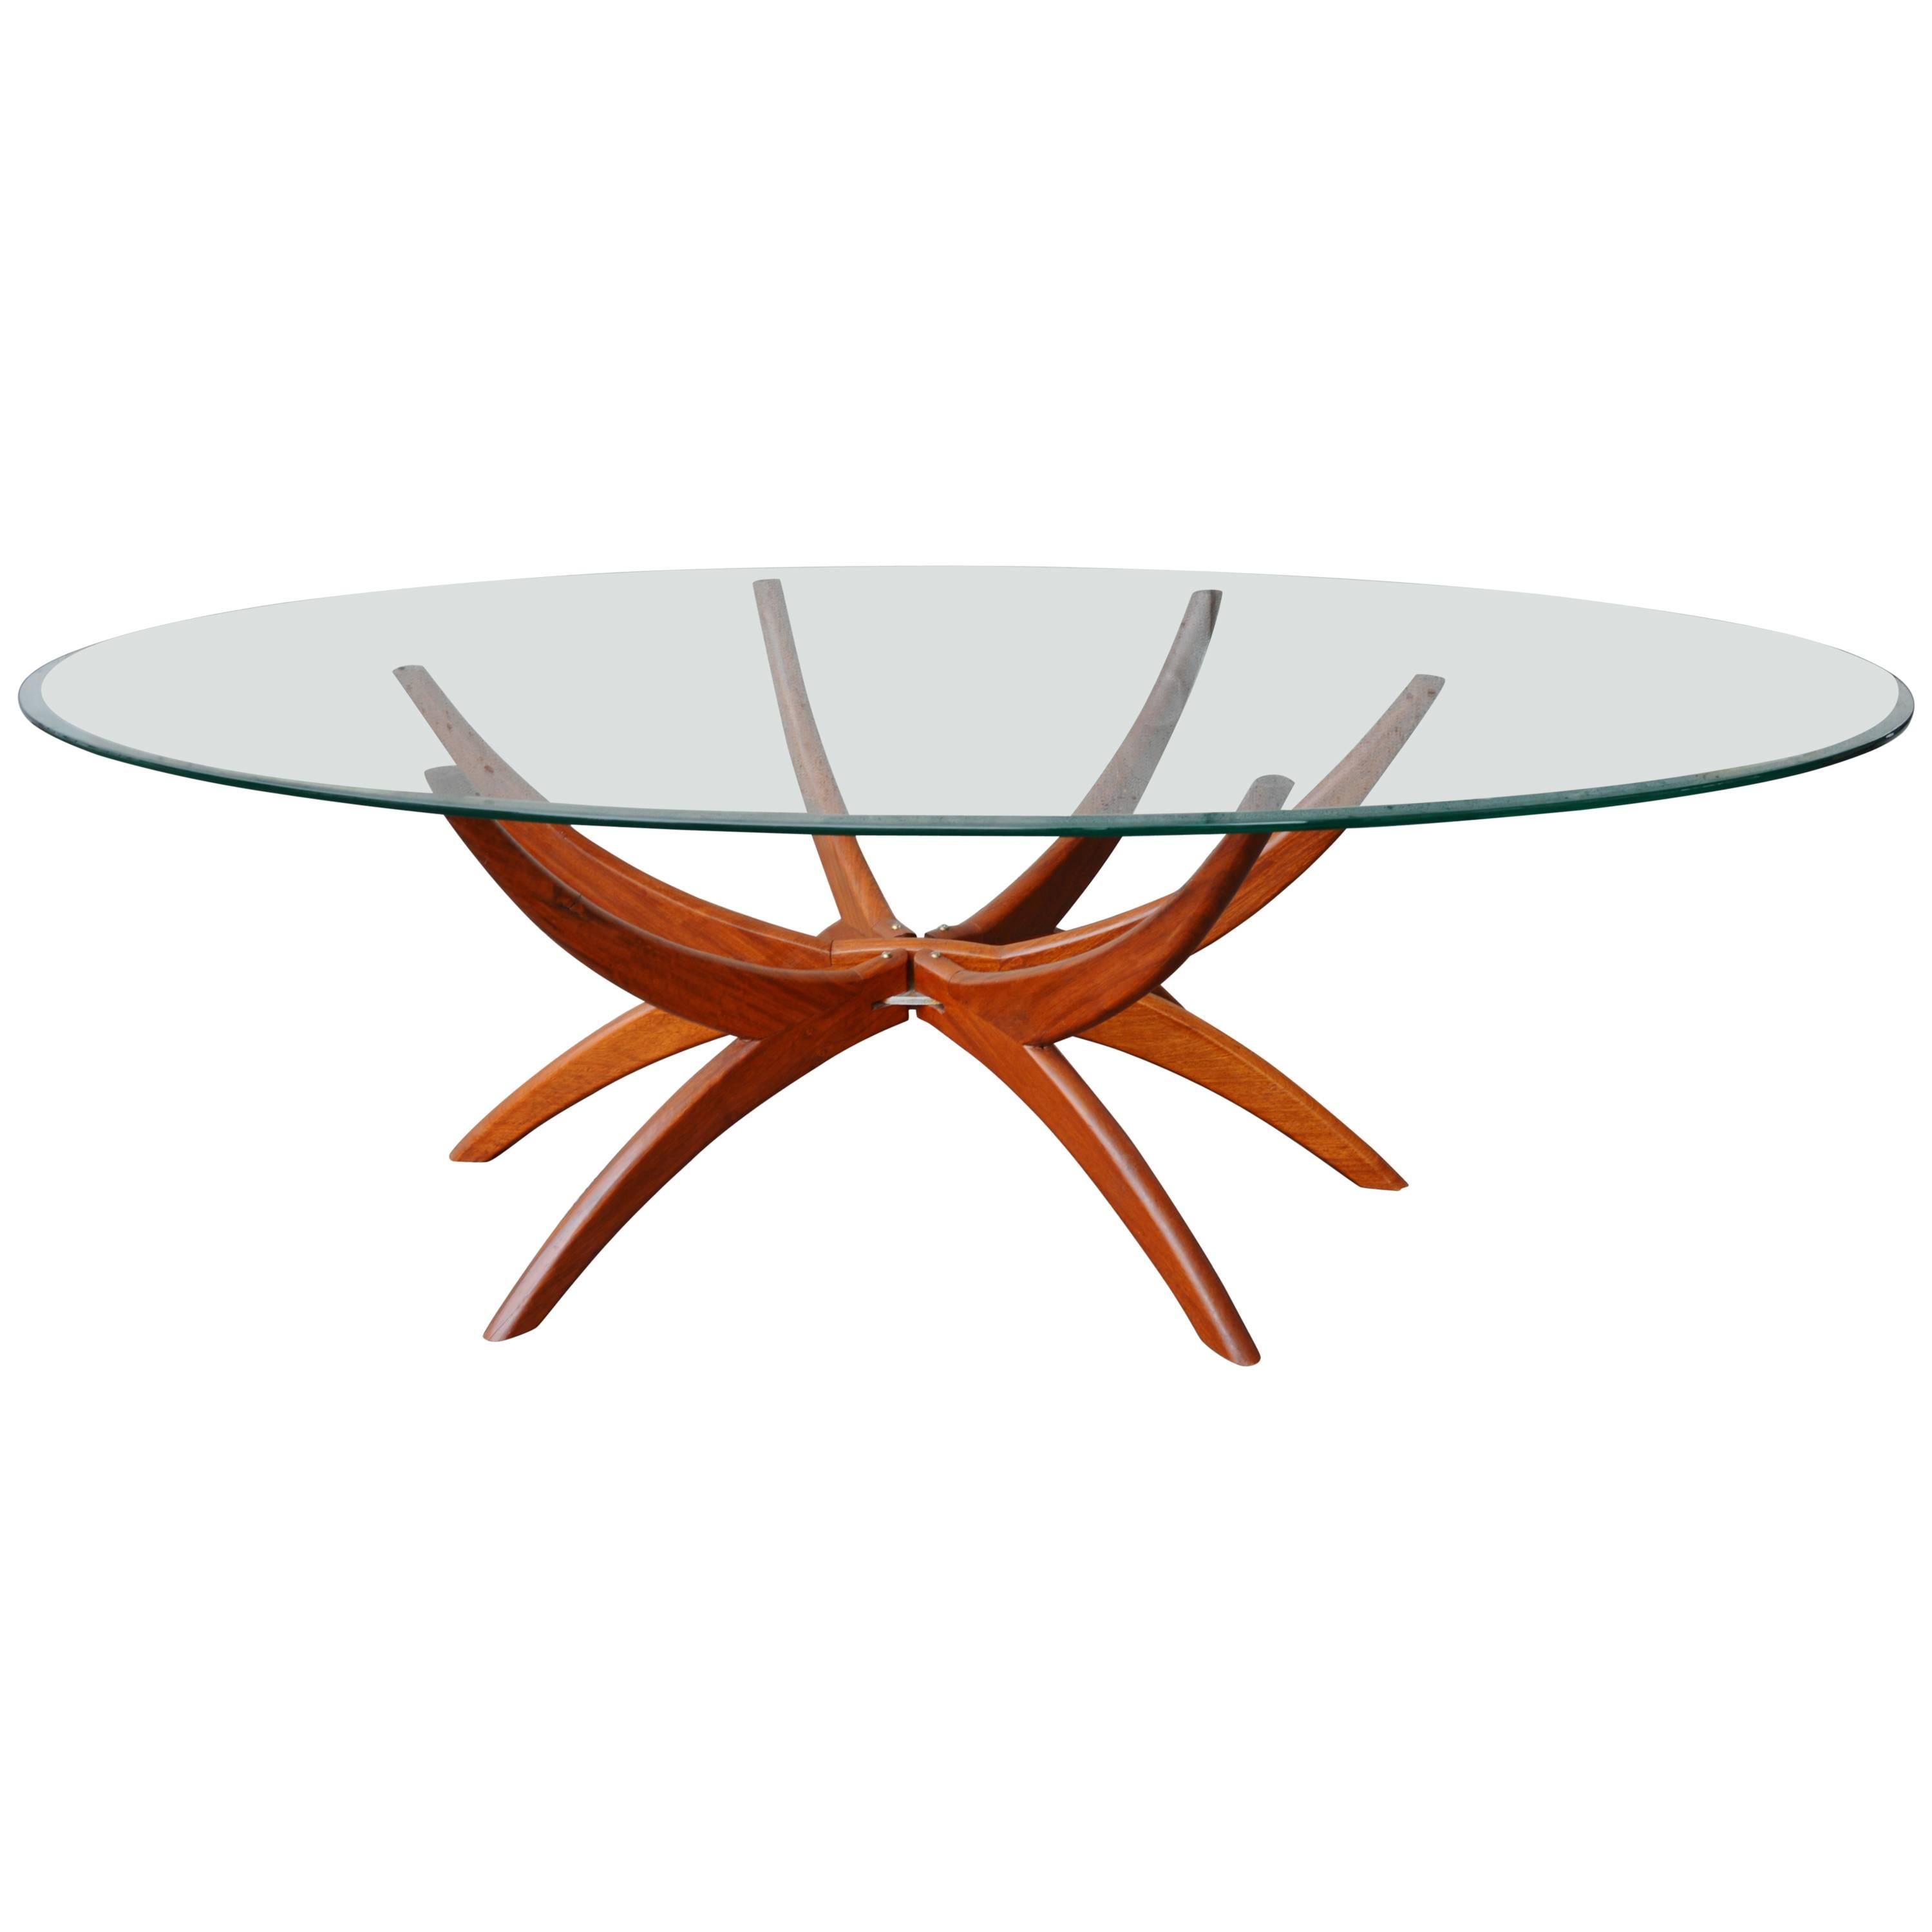 Teak Spider Leg Coffee Table Oval Beveled Clear Glass Top